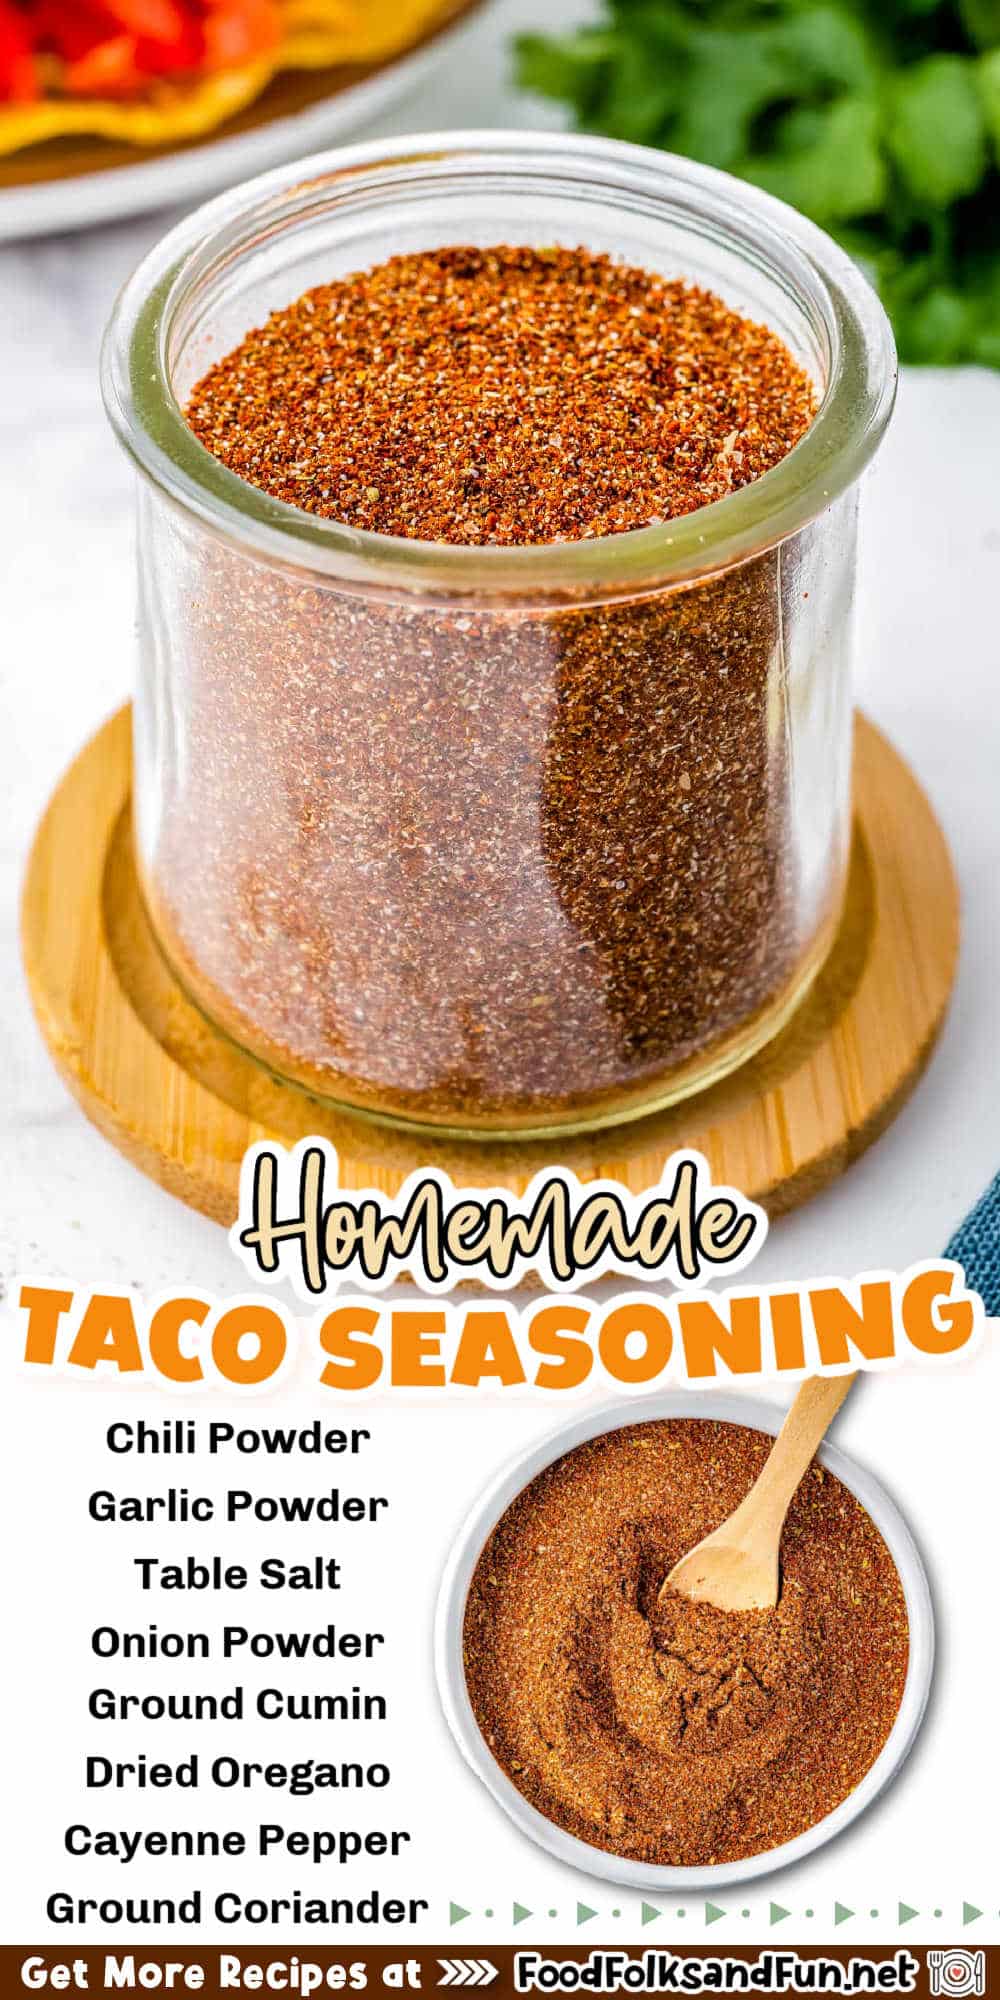 This homemade Taco Seasoning Recipe is an economical version of the pantry staple. It's easy to make and tastes better than store-bought mixes! via @foodfolksandfun